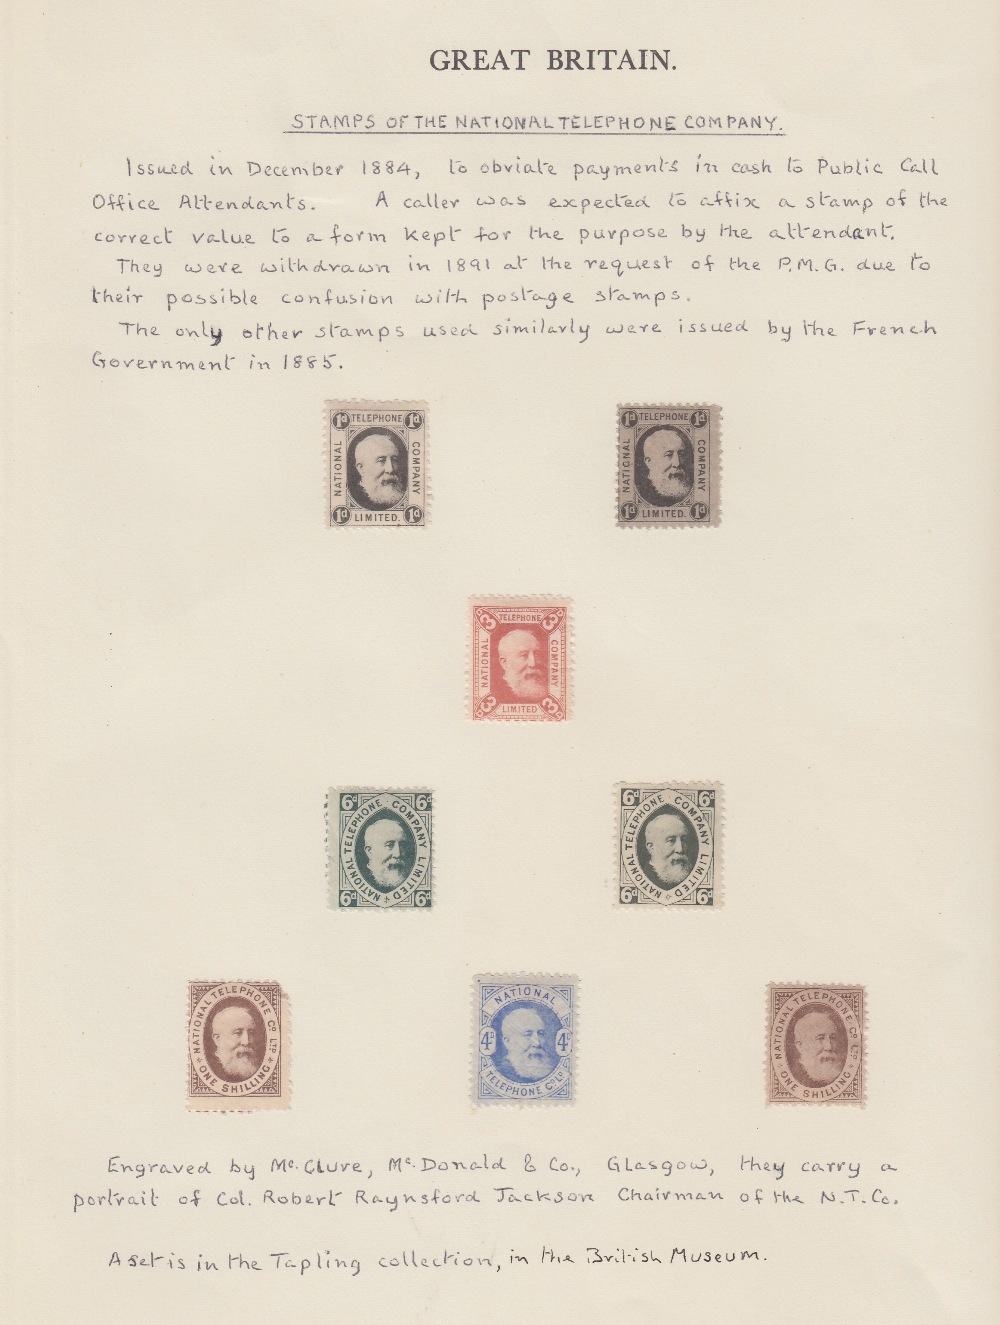 1884 National Telephone Company stamps